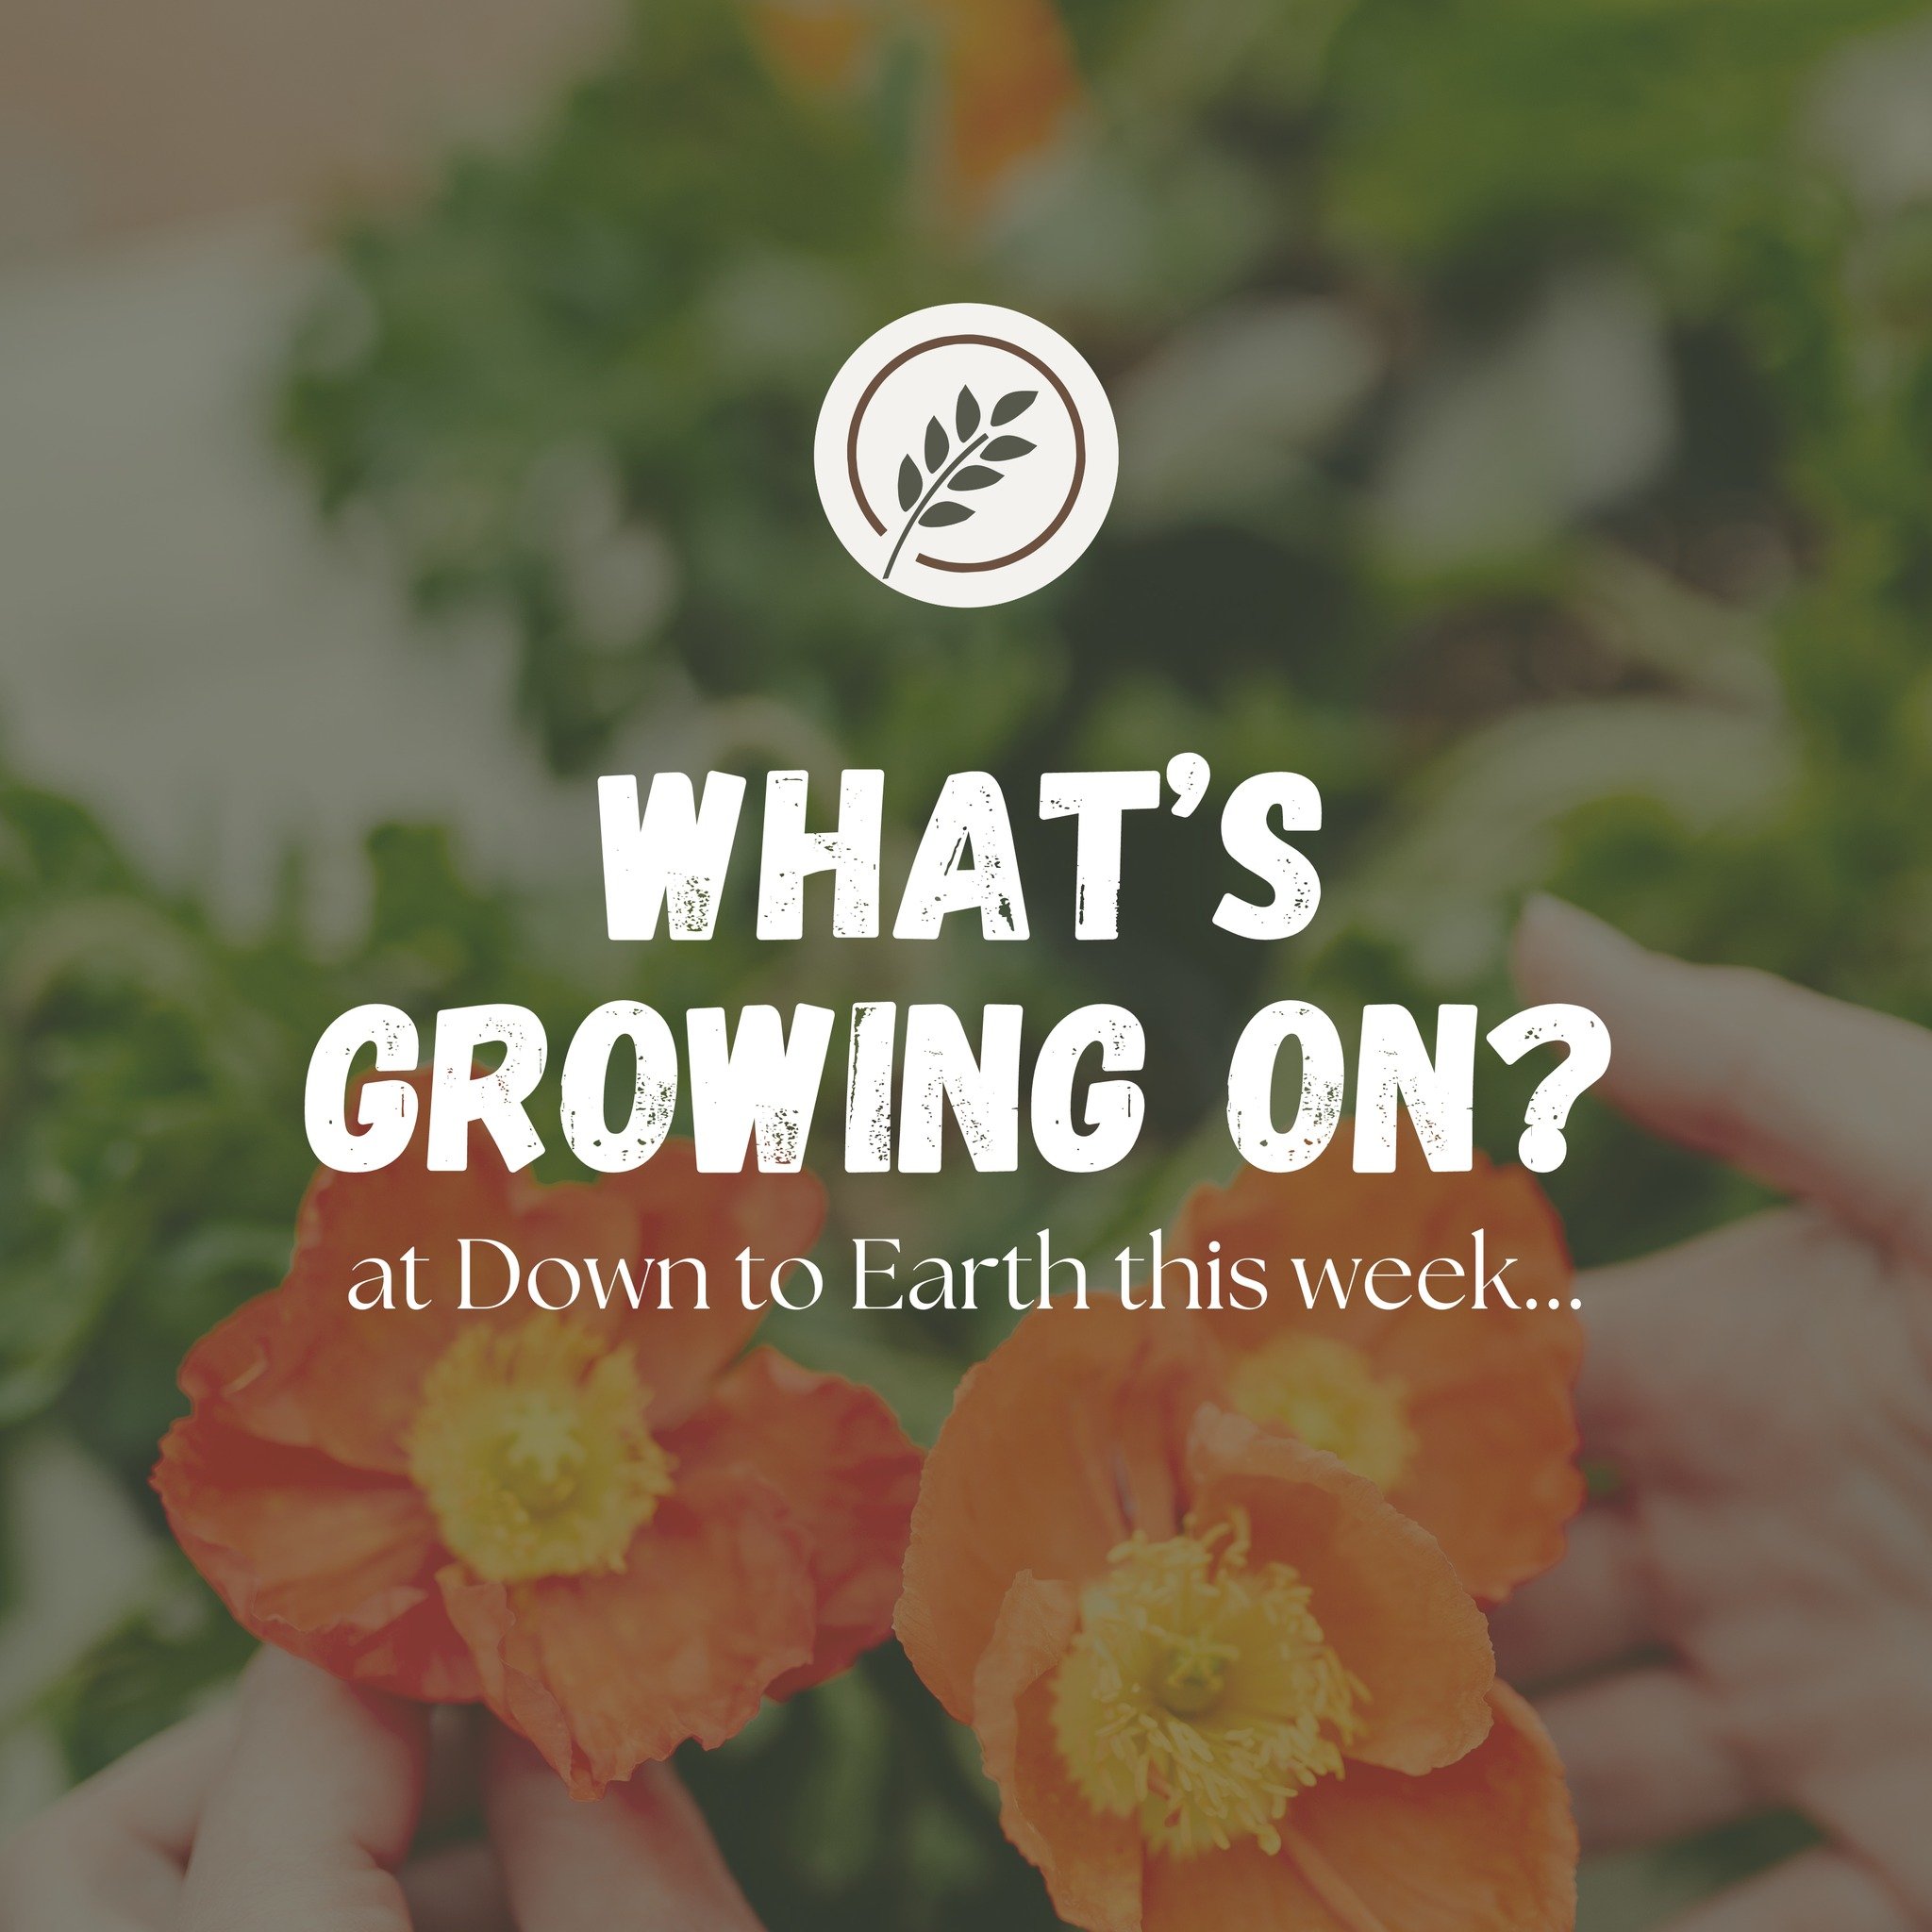 Mark your Calendars!! Here's what's happening at Down to Earth this week!! 

Join us this weekend for our Spring Spectacular Open House!! 🌸☀️🌿

💚Early Summer Hours start today in the Garden Center!
🌸Bare Root Peony Sale - May 4th &amp; 5th!
🌼Ear